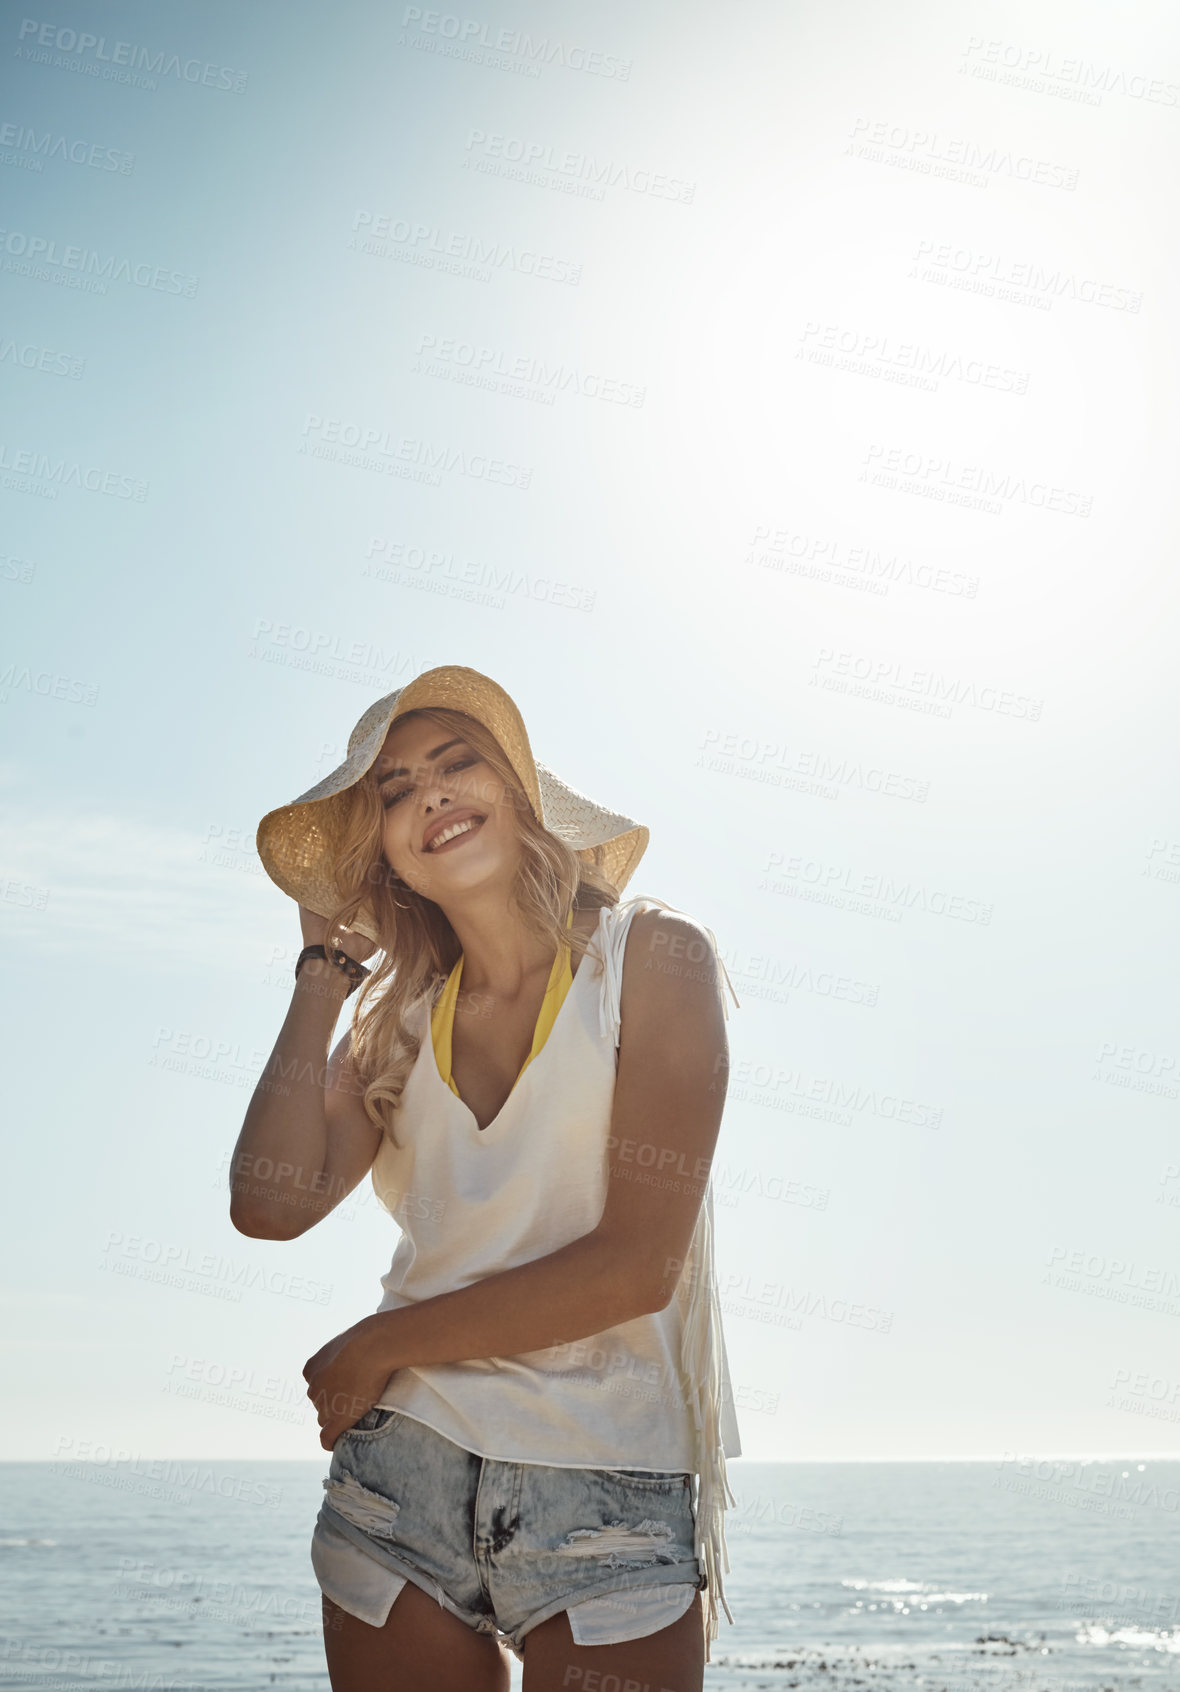 Buy stock photo Portrait of an attractive young woman enjoying her day on the beach